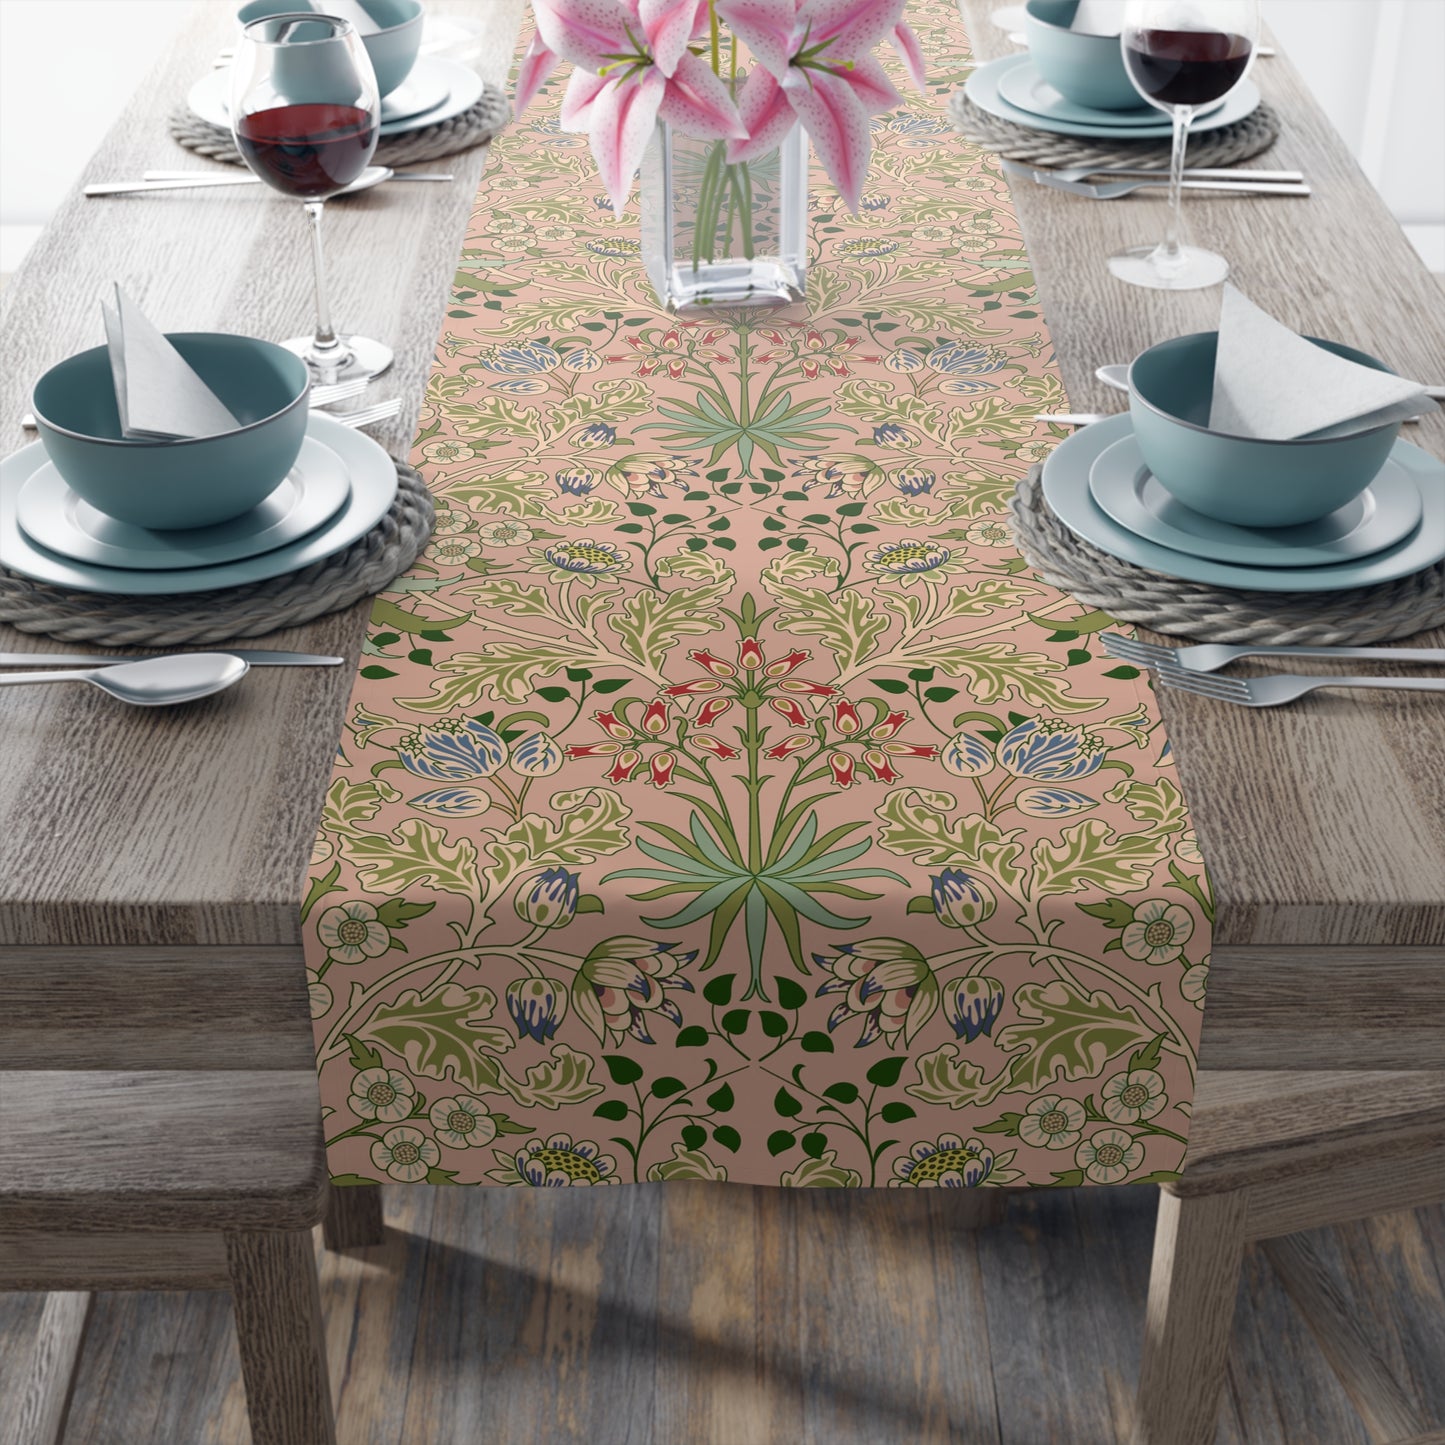 william-morris-co-table-runner-hyacinth-collection-blossom-5